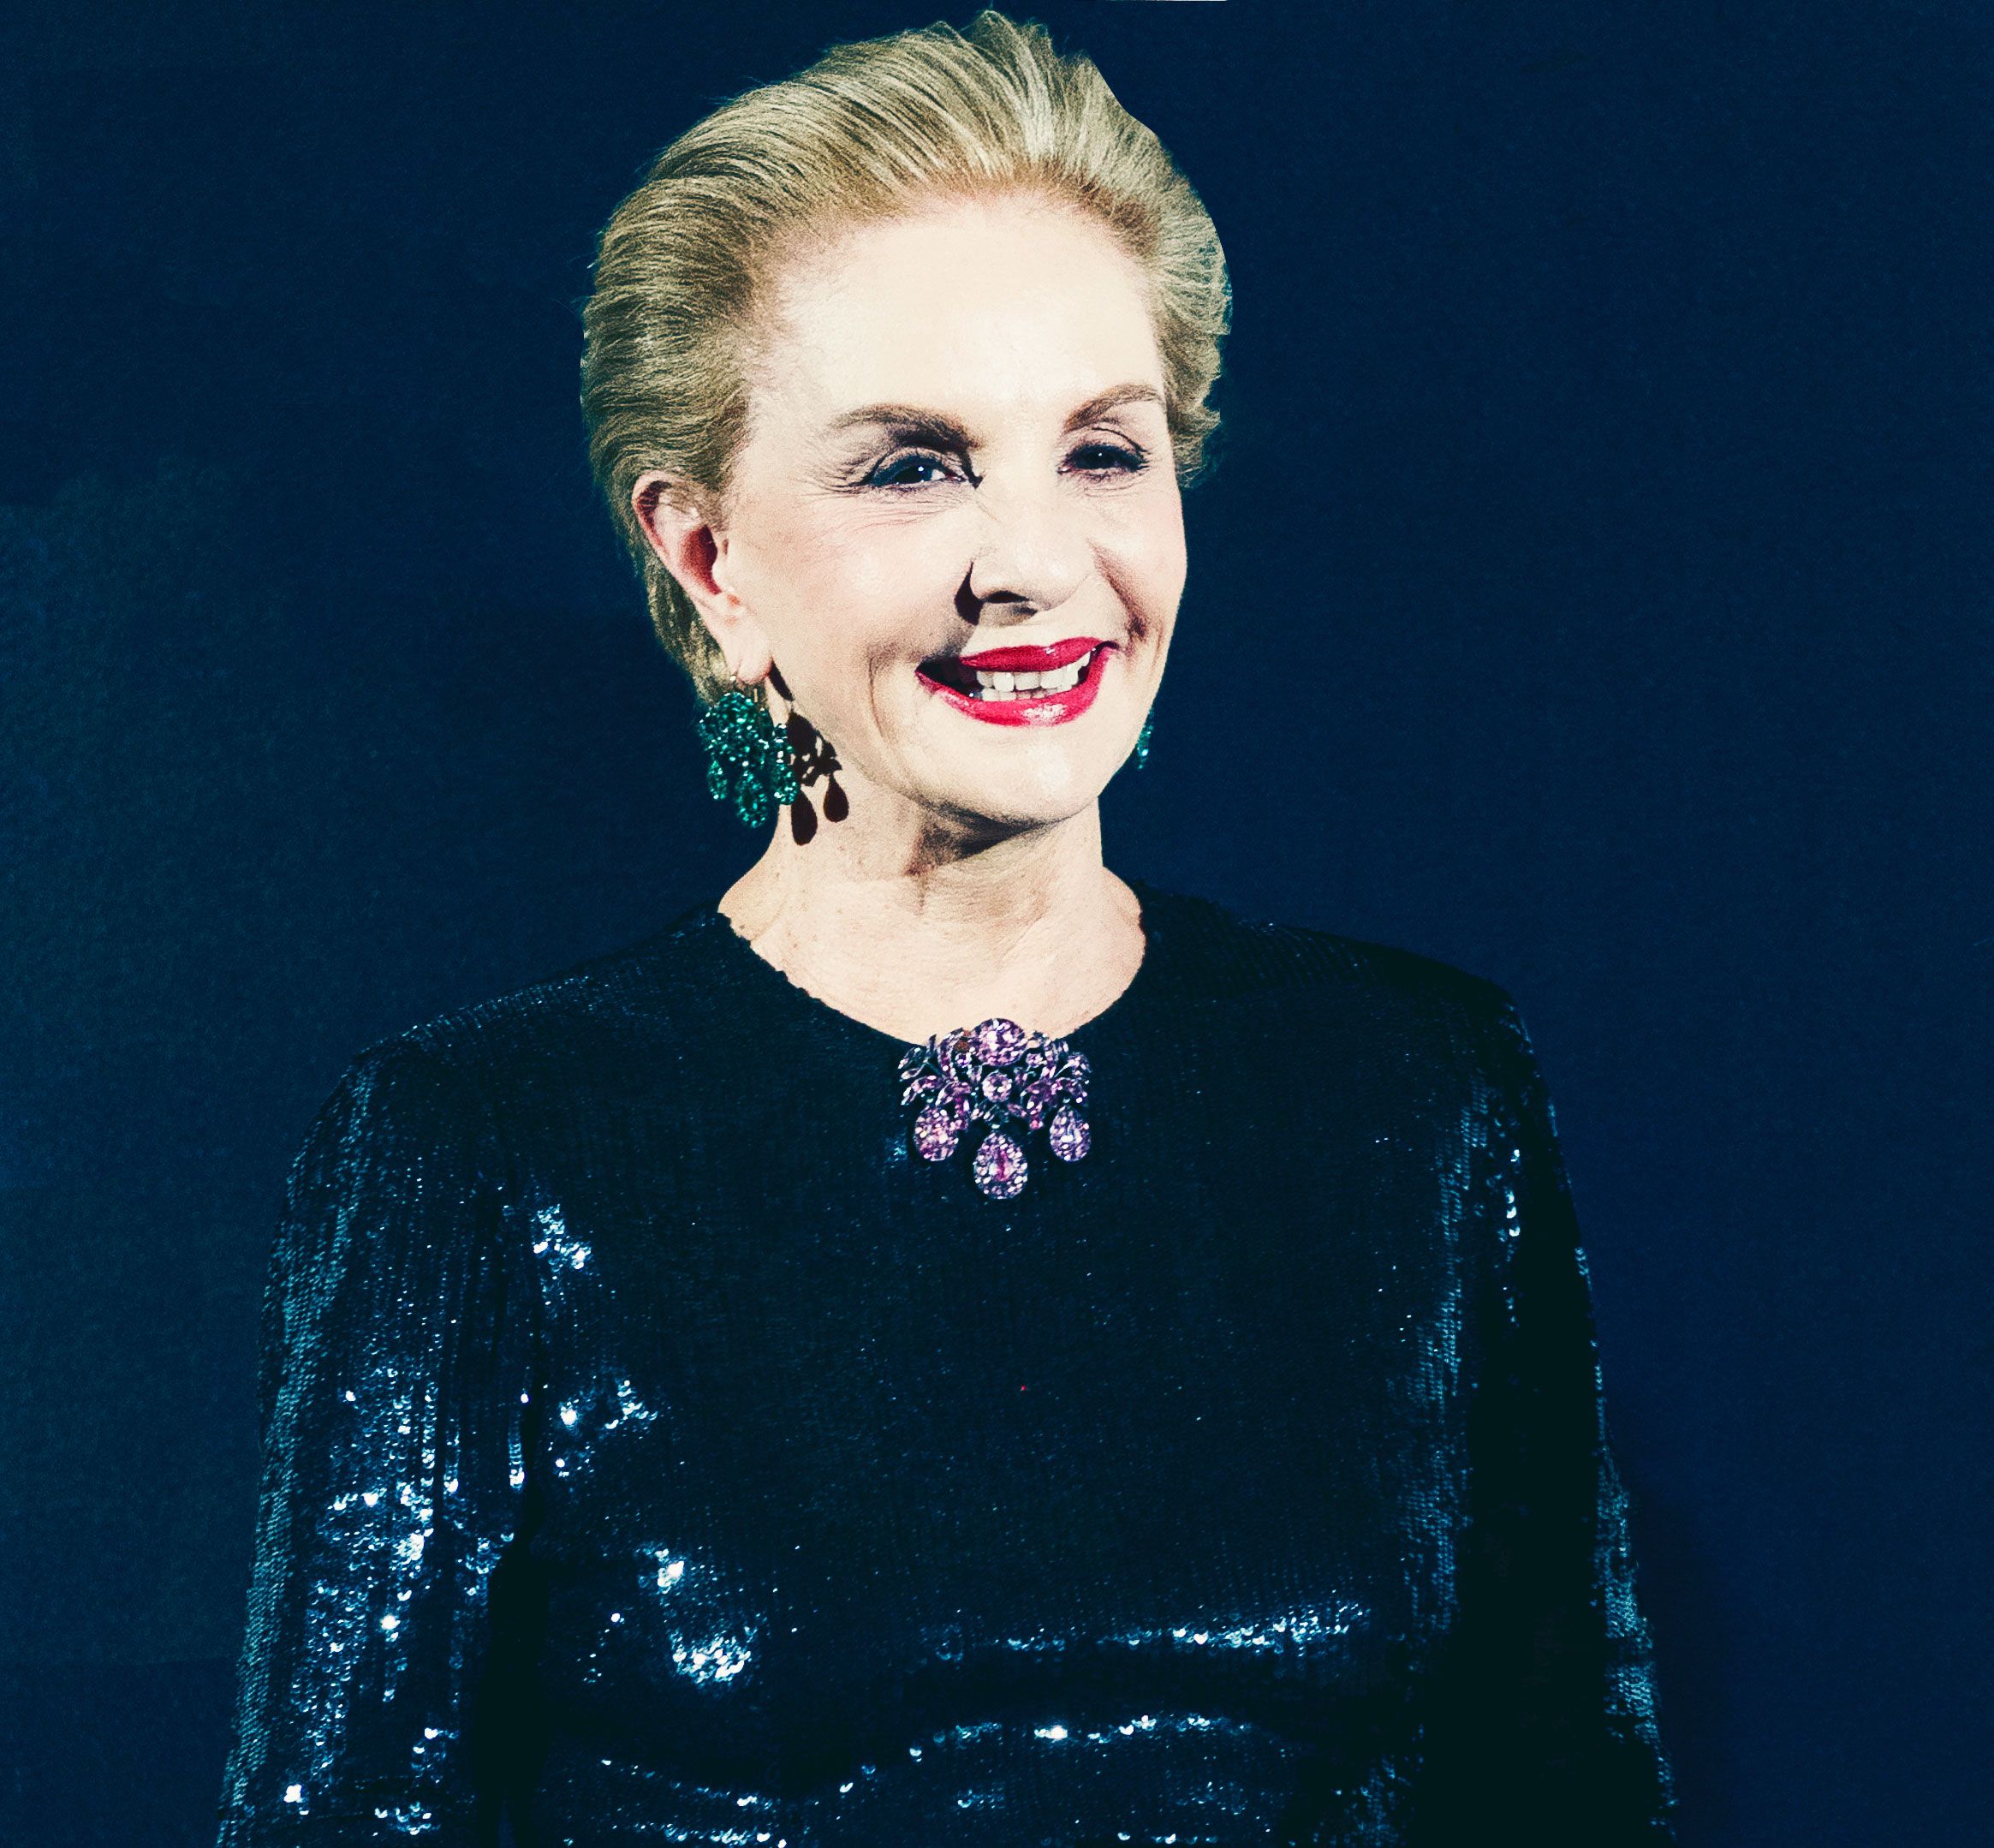 Carolina Herrera: Mexico accuses fashion house of cultural appropriation